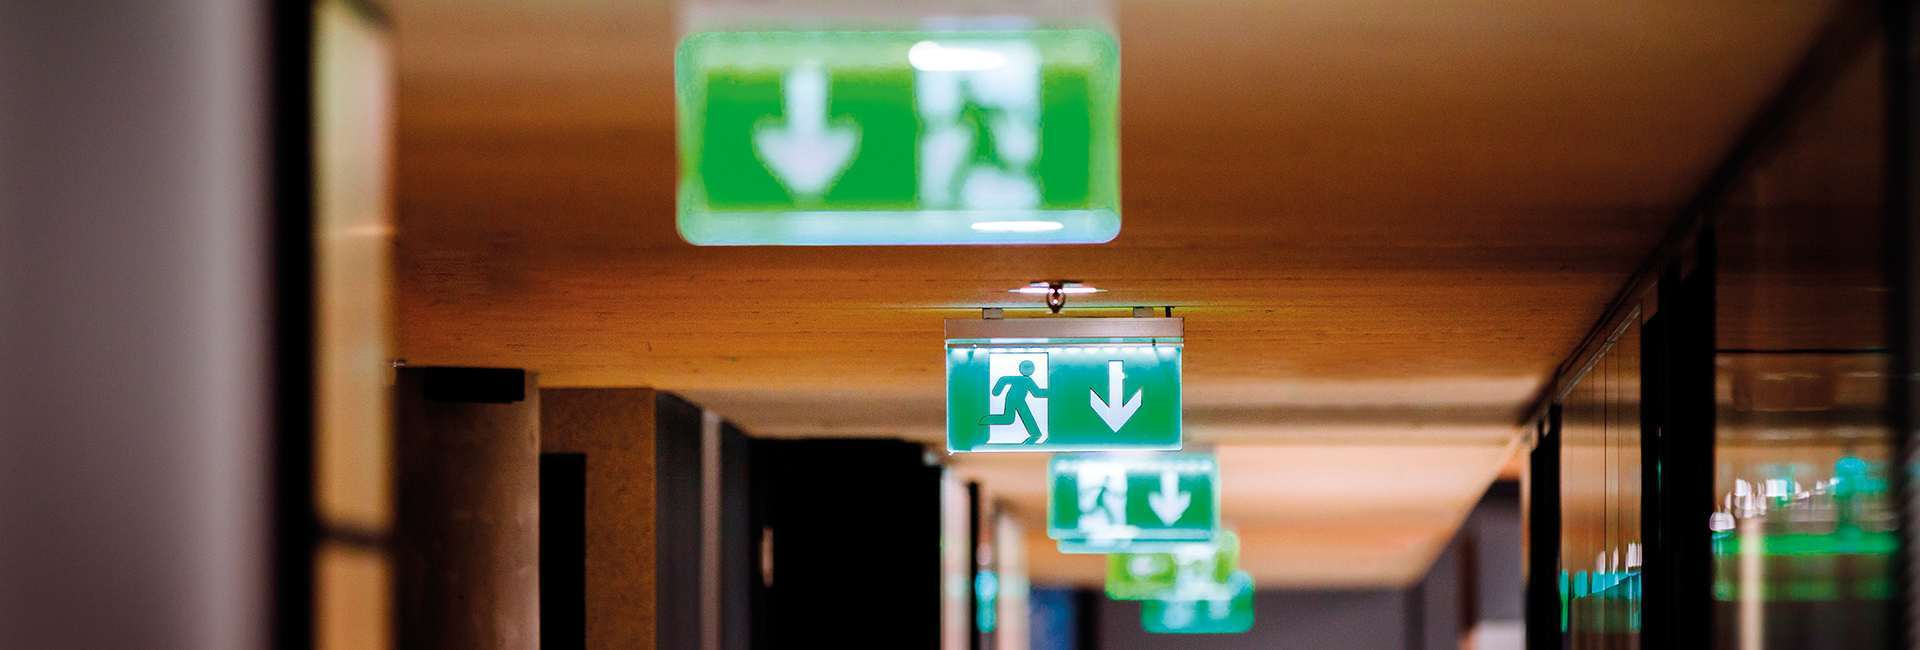 Show products in category Aurora launches Emergency Lighting Range